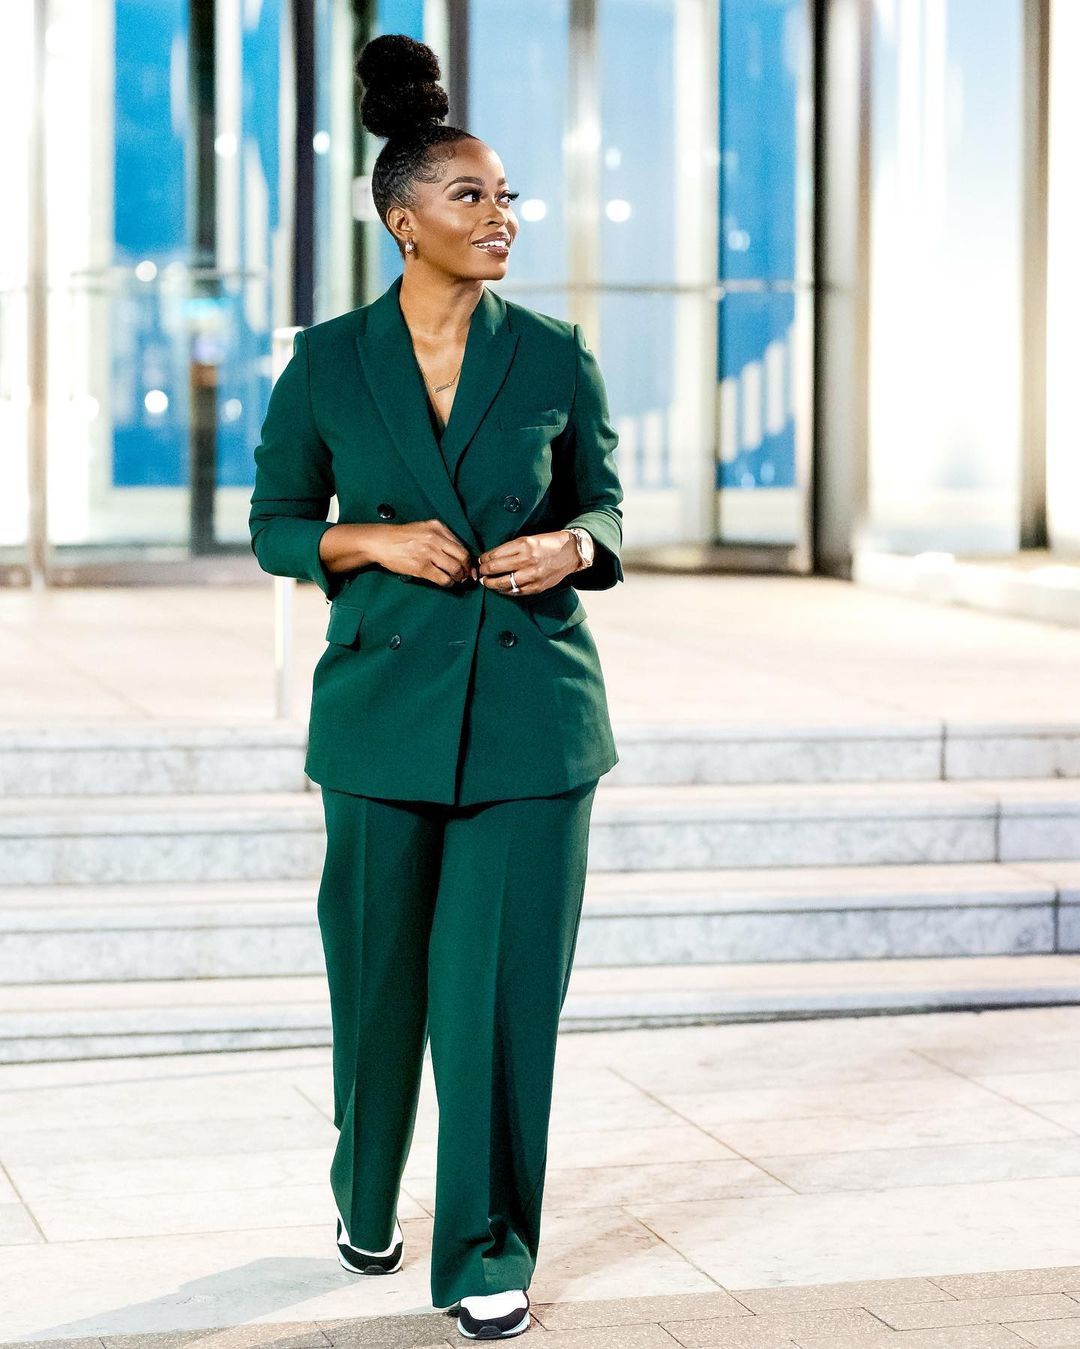 You'll Feel Like A Boss When You Wear These Chic Style Inspos To Work #Fashion101 